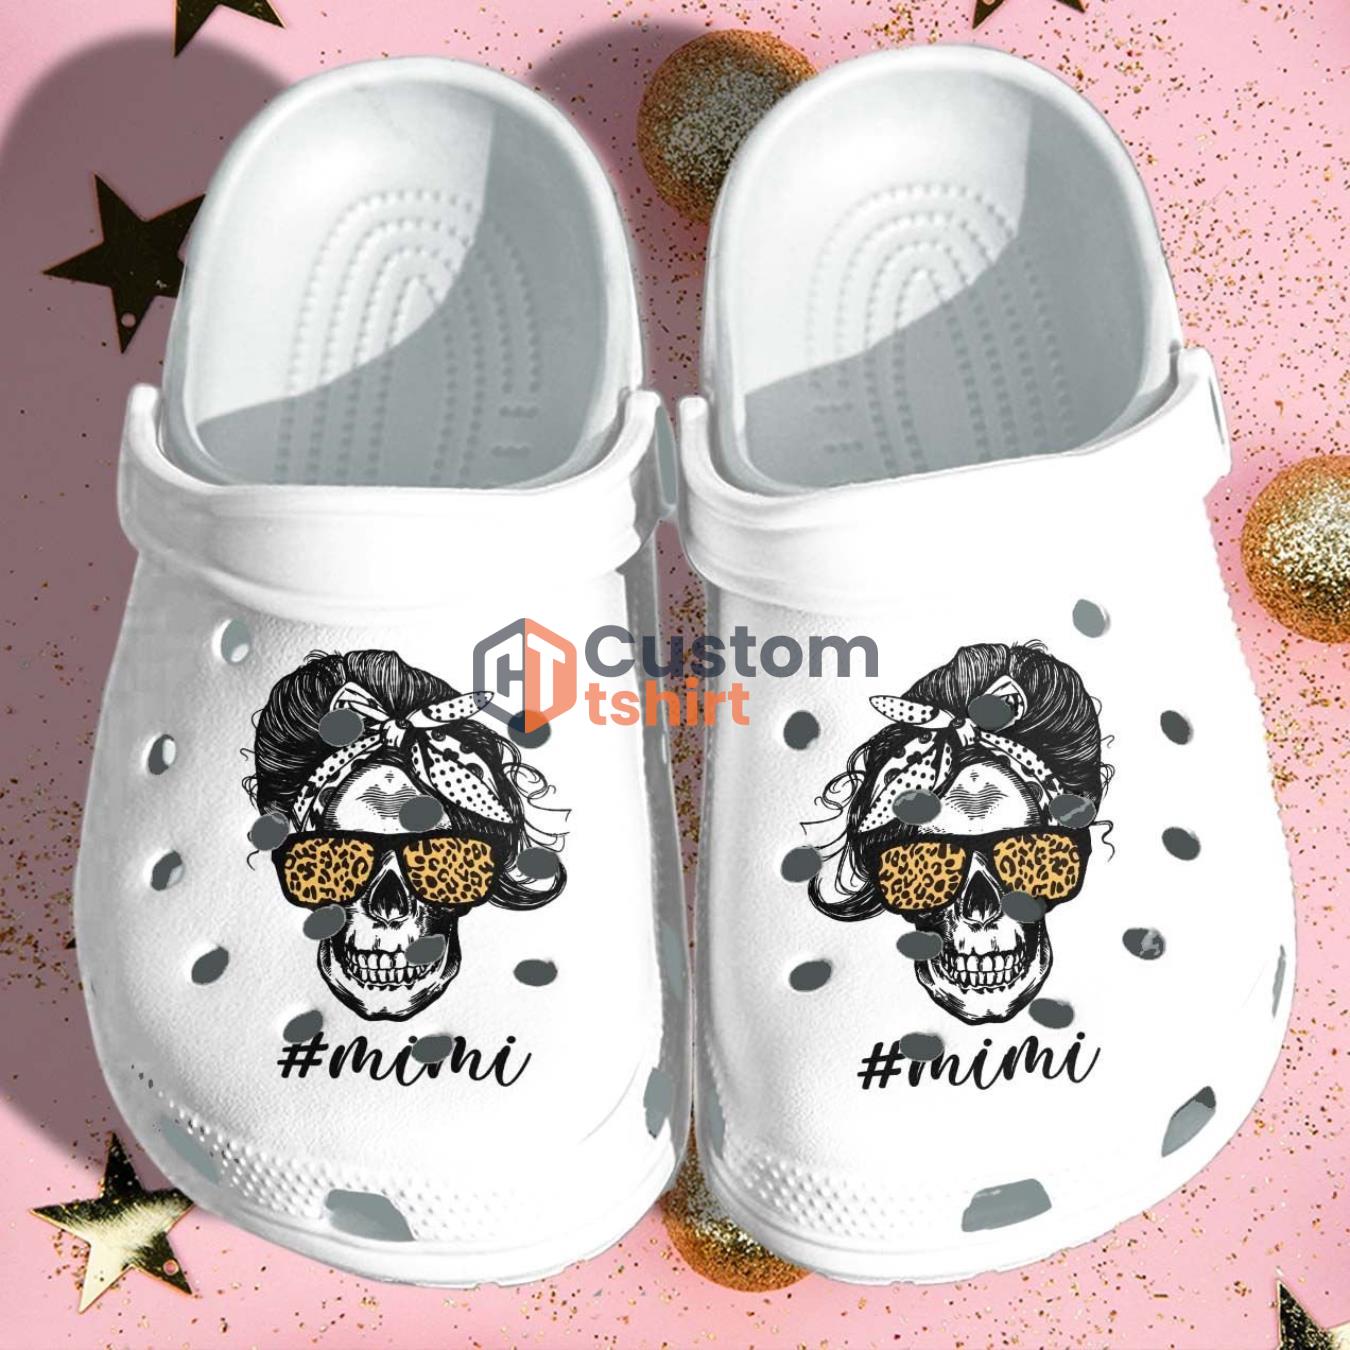 Mimi Tattoo Skull Clog Shoes Mothers Day Gifts - Nana Tattoo Clog Shoes For Grandma Product Photo 1 Product photo 1